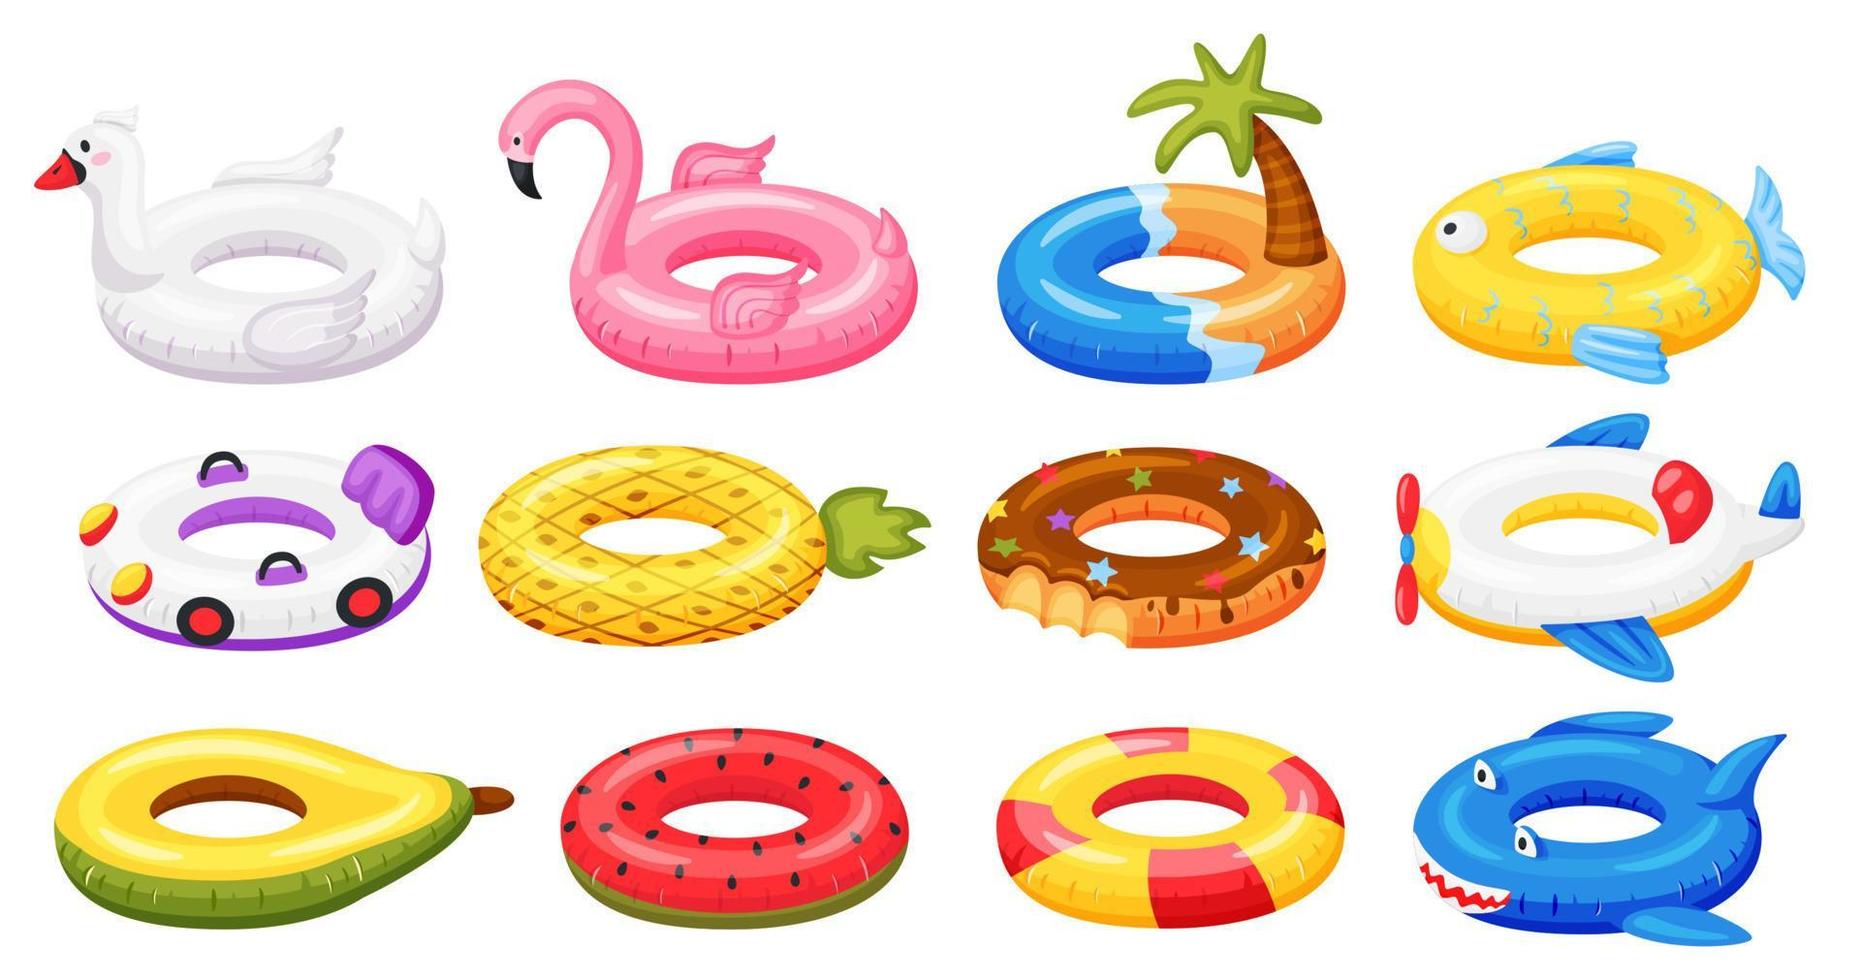 Swimming ring. Inflatable pool accessories, floating rubber toys watermelon, pineapple, donut, flamingo. Cartoon summer swim ring vector set